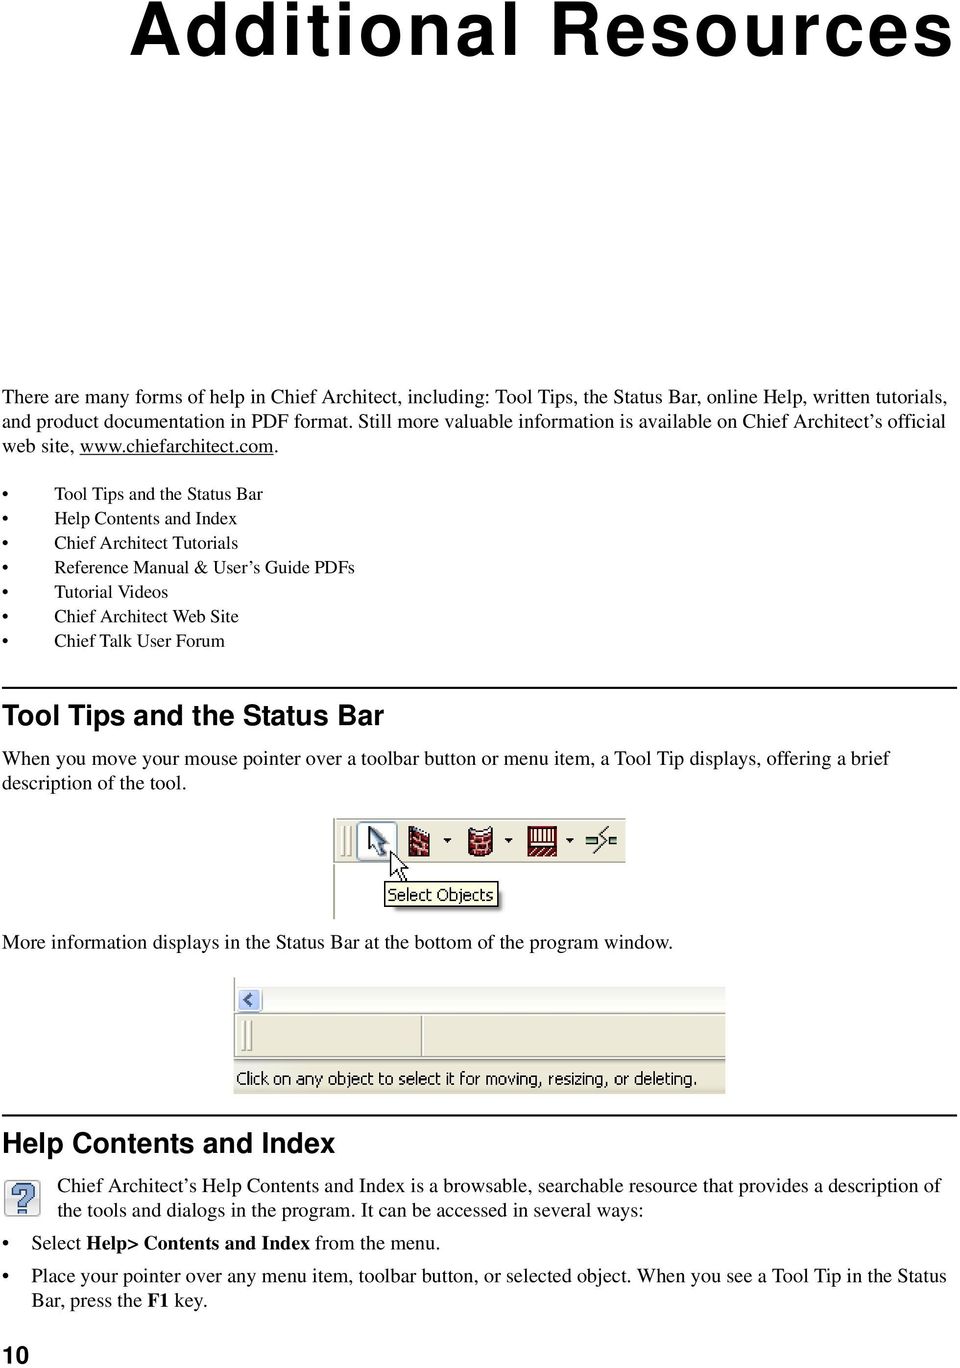 Tool Tips and the Status Bar Help Contents and Index Chief Architect Tutorials Reference Manual & User s Guide PDFs Tutorial Videos Chief Architect Web Site Chief Talk User Forum Tool Tips and the